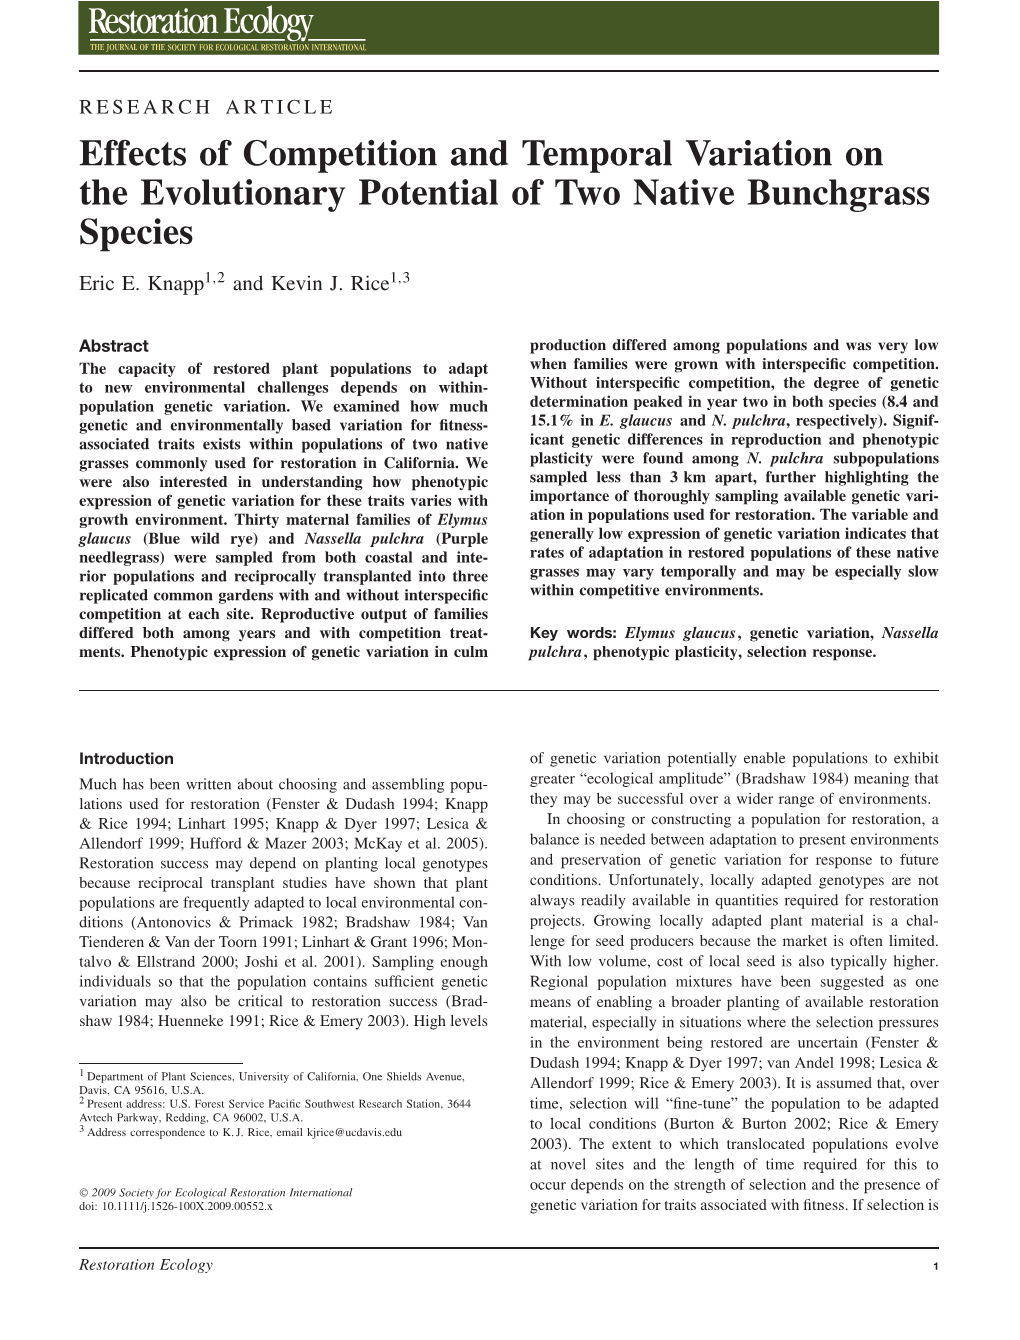 Effects of Competition and Temporal Variation on the Evolutionary Potential of Two Native Bunchgrass Species